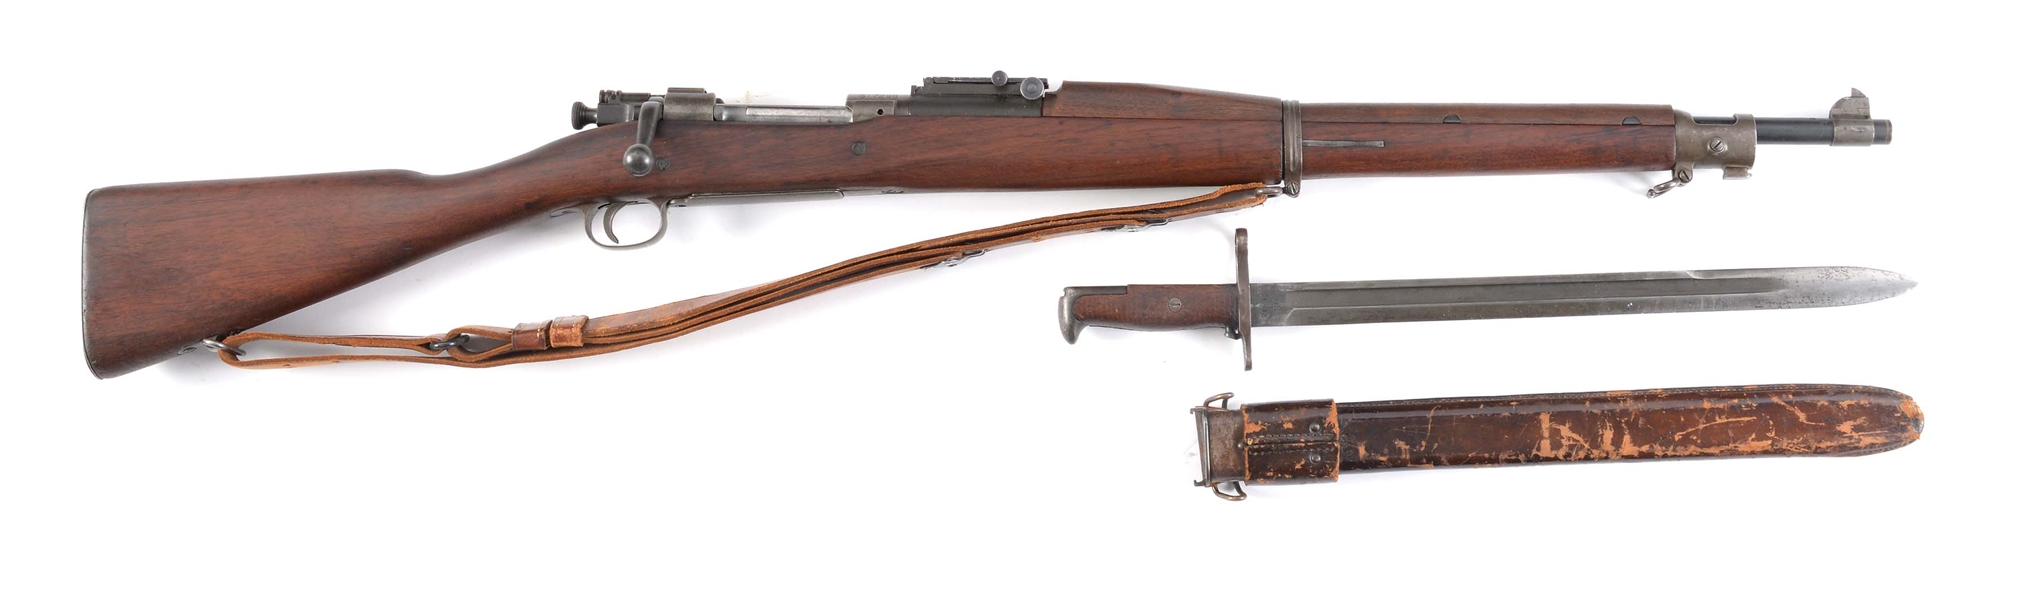 (C) SPRINGFIELD 1903 BOLT ACTION MILITARY RIFLE WITH BAYONET